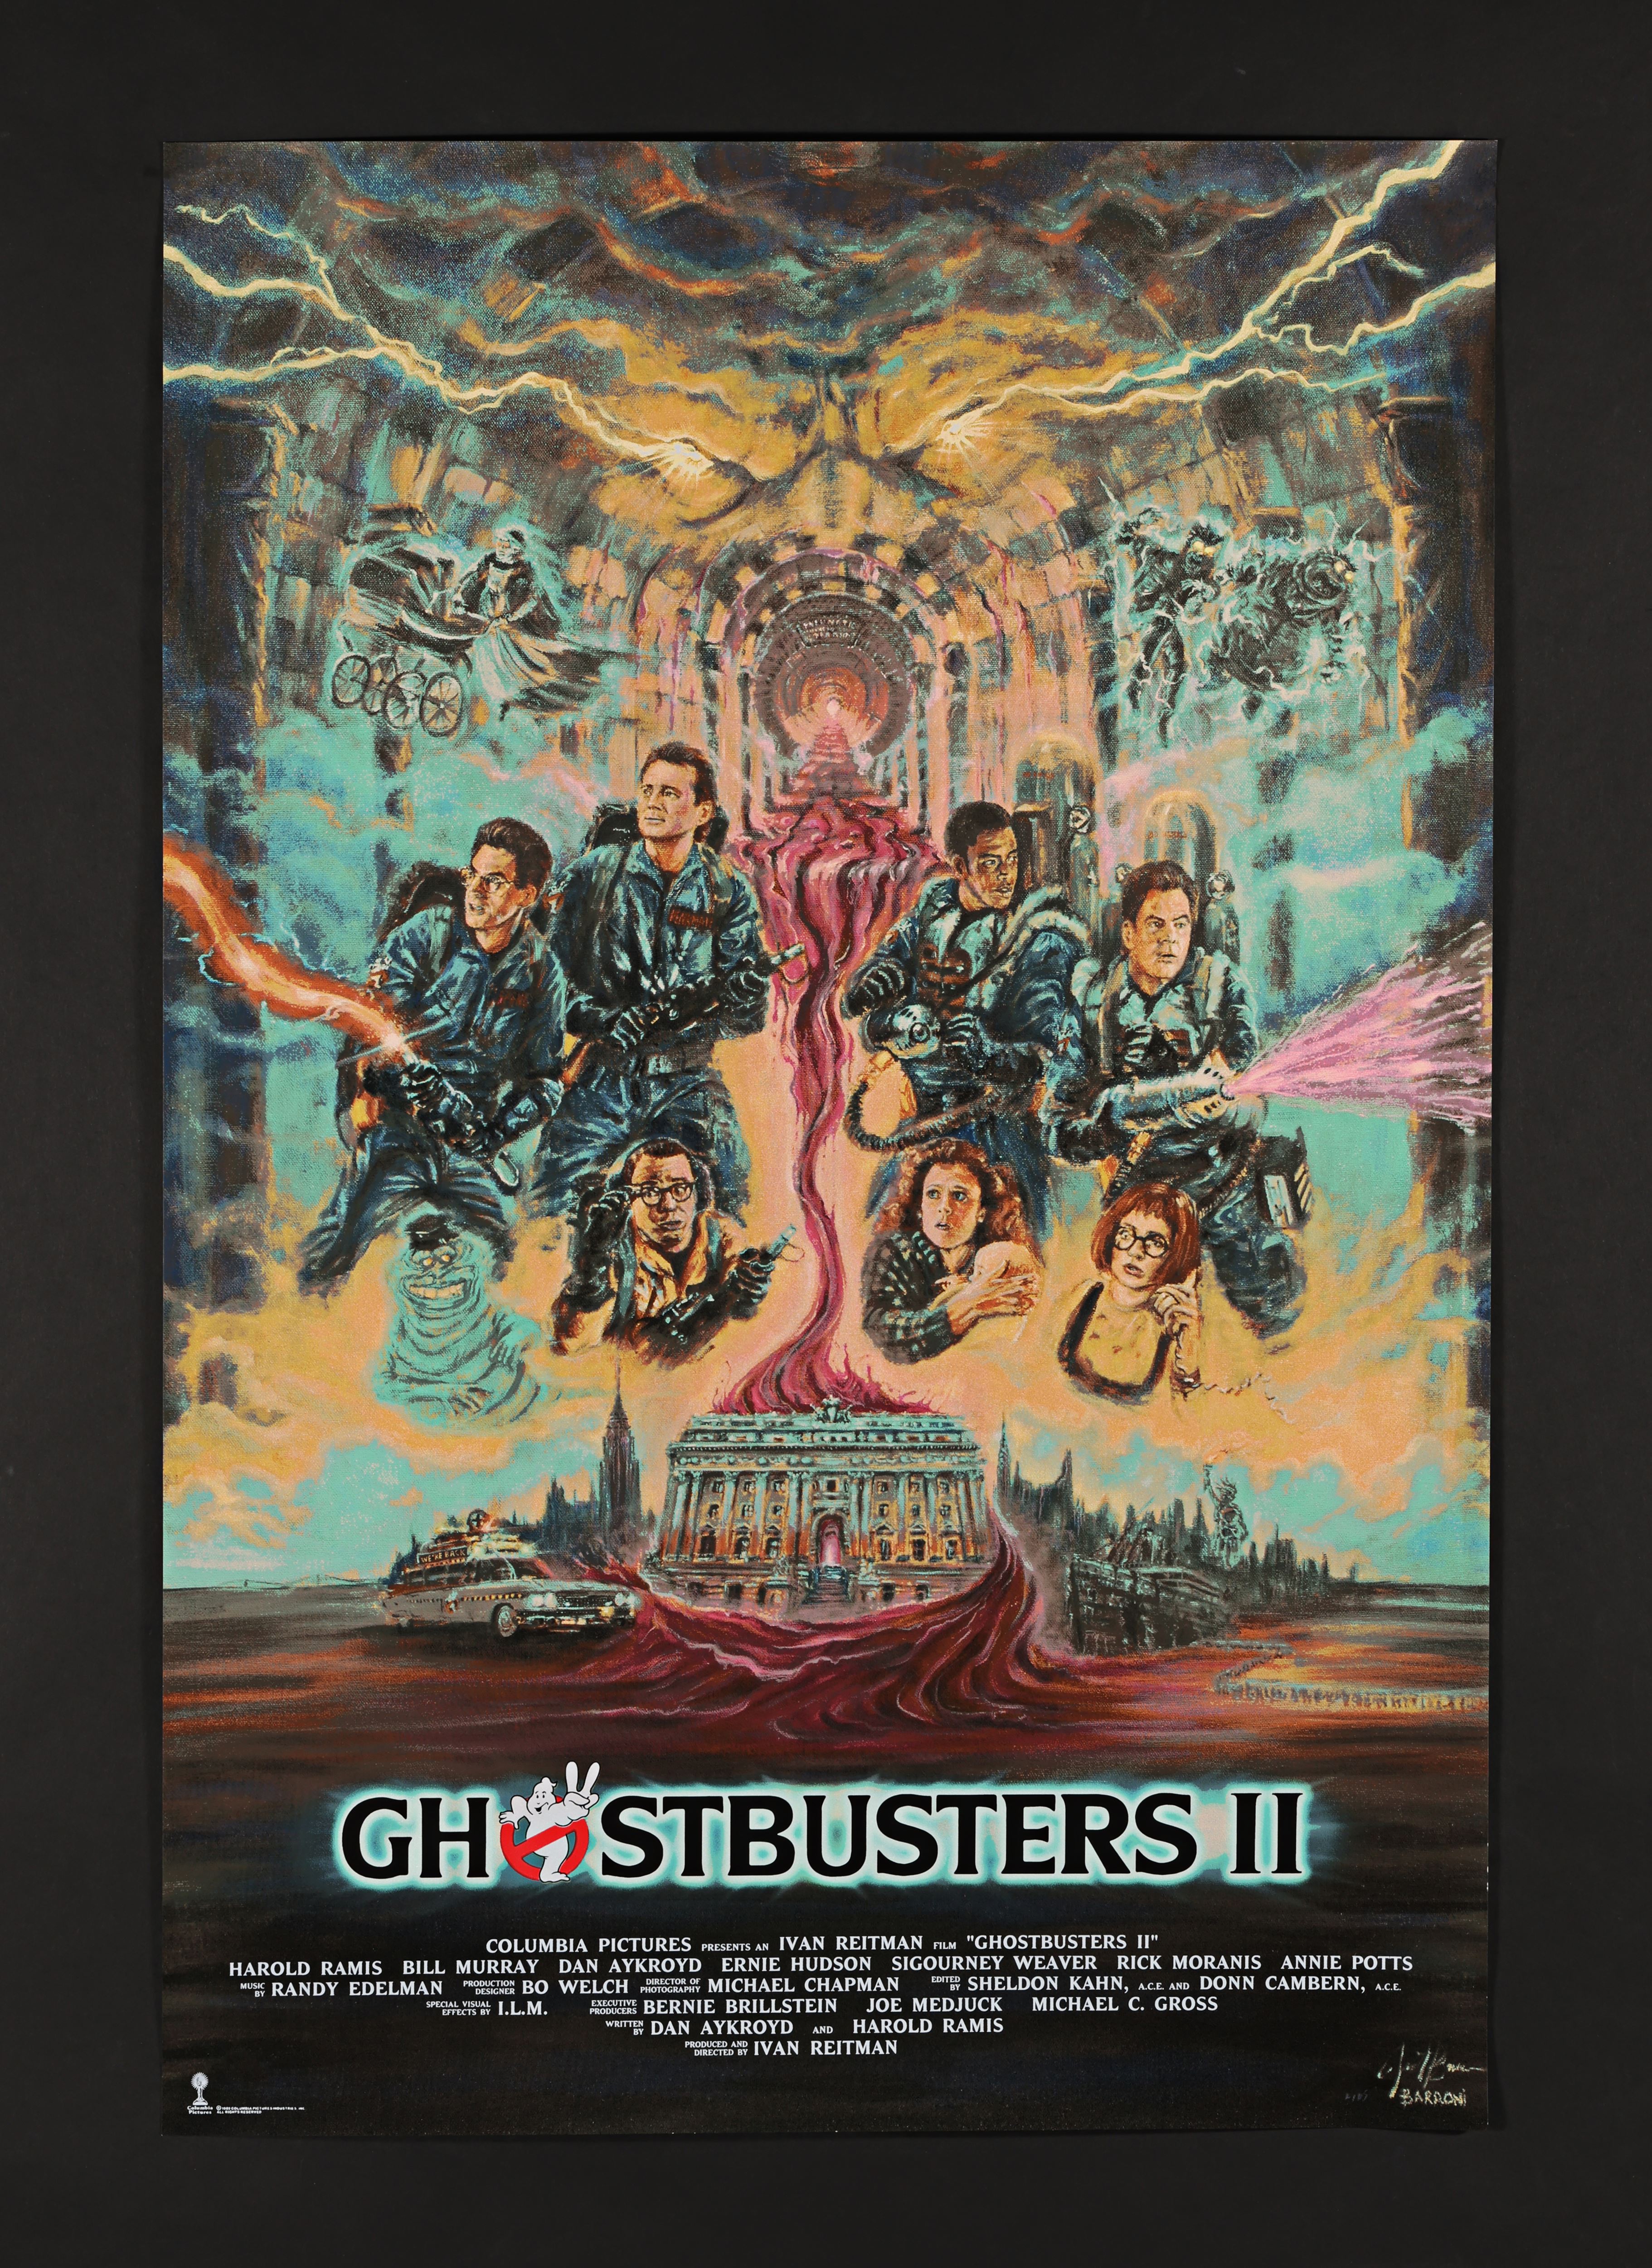 GHOSTBUSTERS (1984) AND GHOSTBUSTERS II (1989) - Two Hand-Numbered Limited Edition Prints by Gustavo - Image 2 of 2